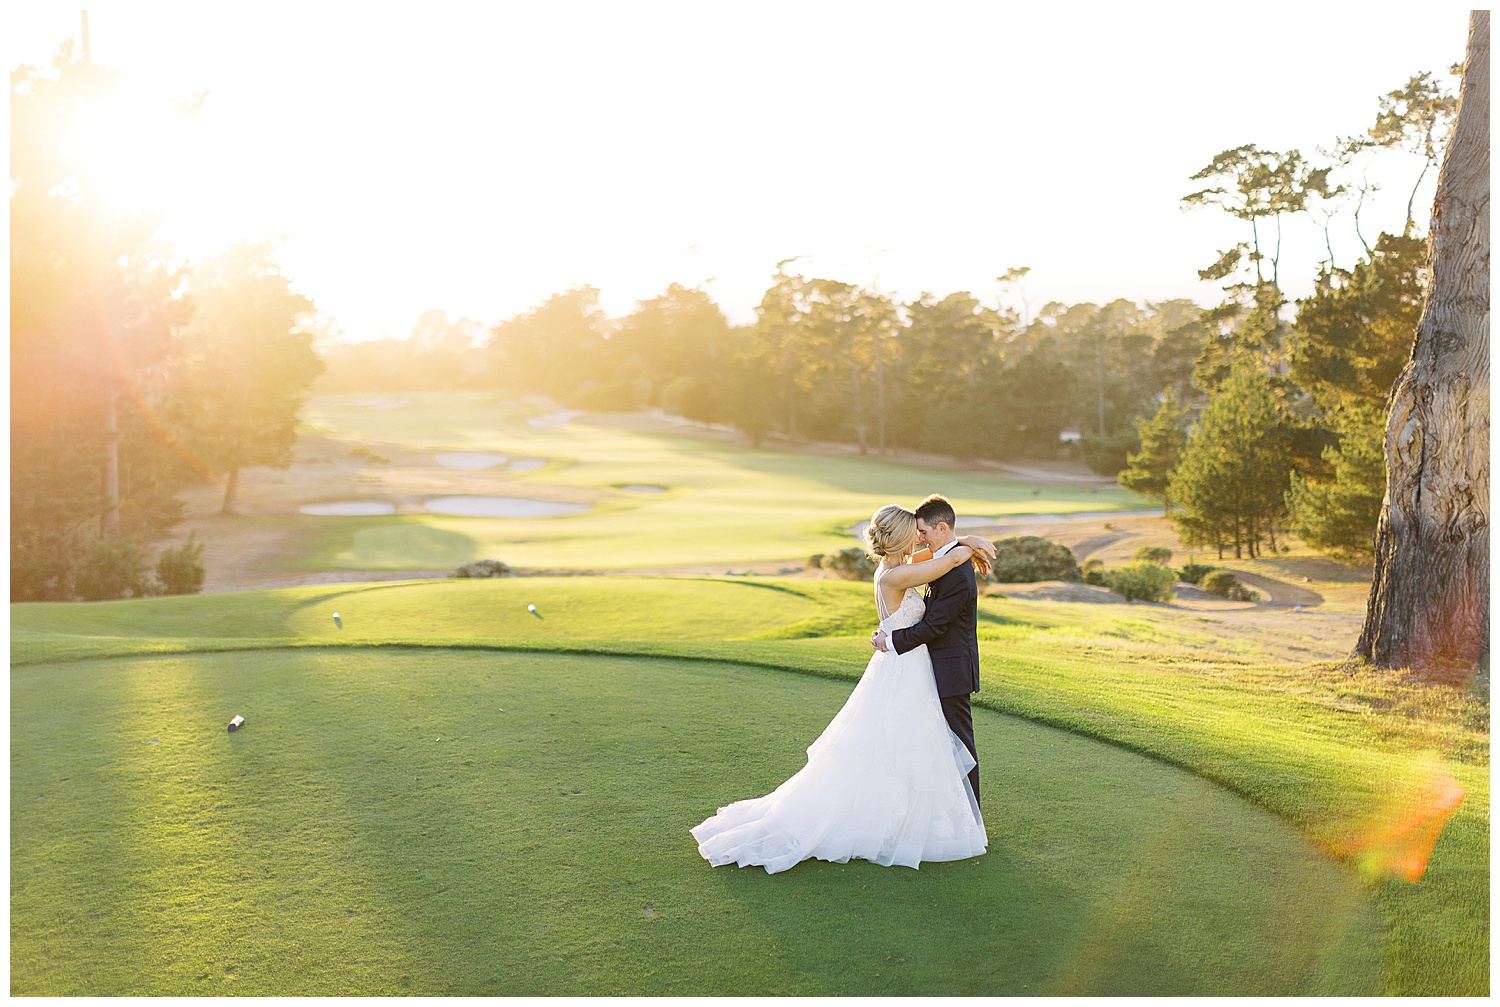 the bride and groom embracing each other at Spyglass Hill Golf Course in Pebble Beach with the sun setting behind them